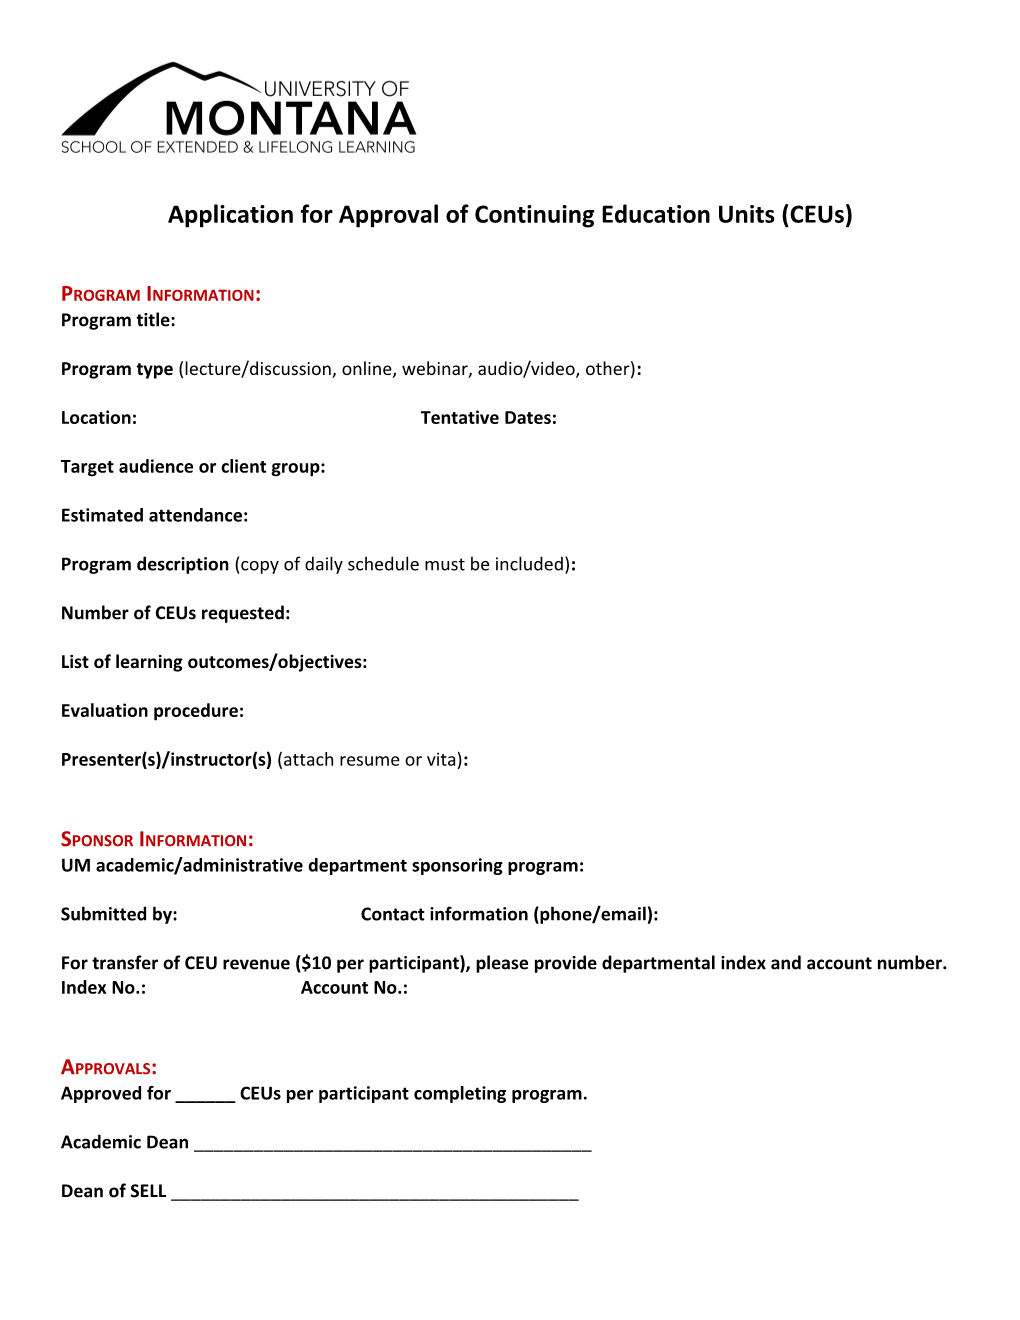 Application for Approval of Continuing Education Units (Ceus)